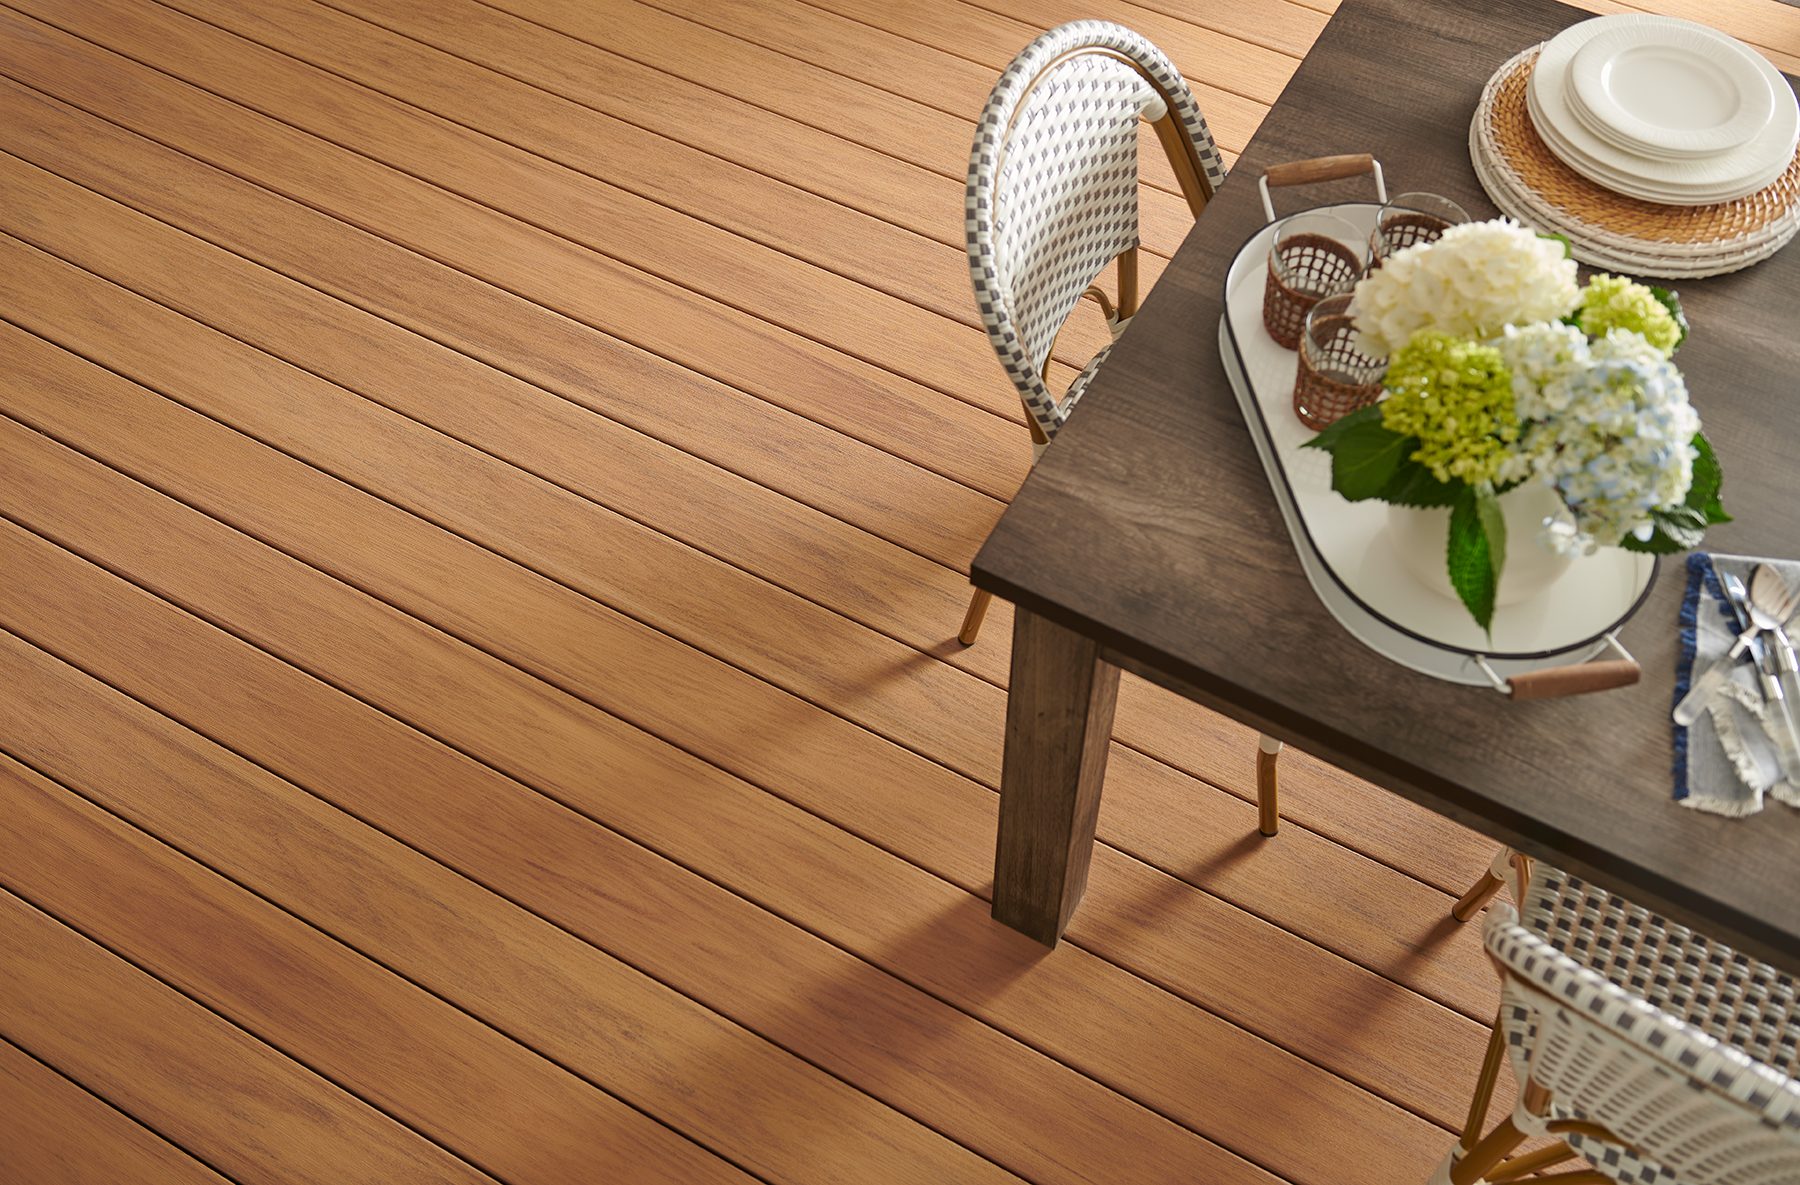 https://www.wolfhomeproducts.com/wp-content/uploads/2023/06/Wolf-Exterior_Overhead-Decking-Dinning.jpg